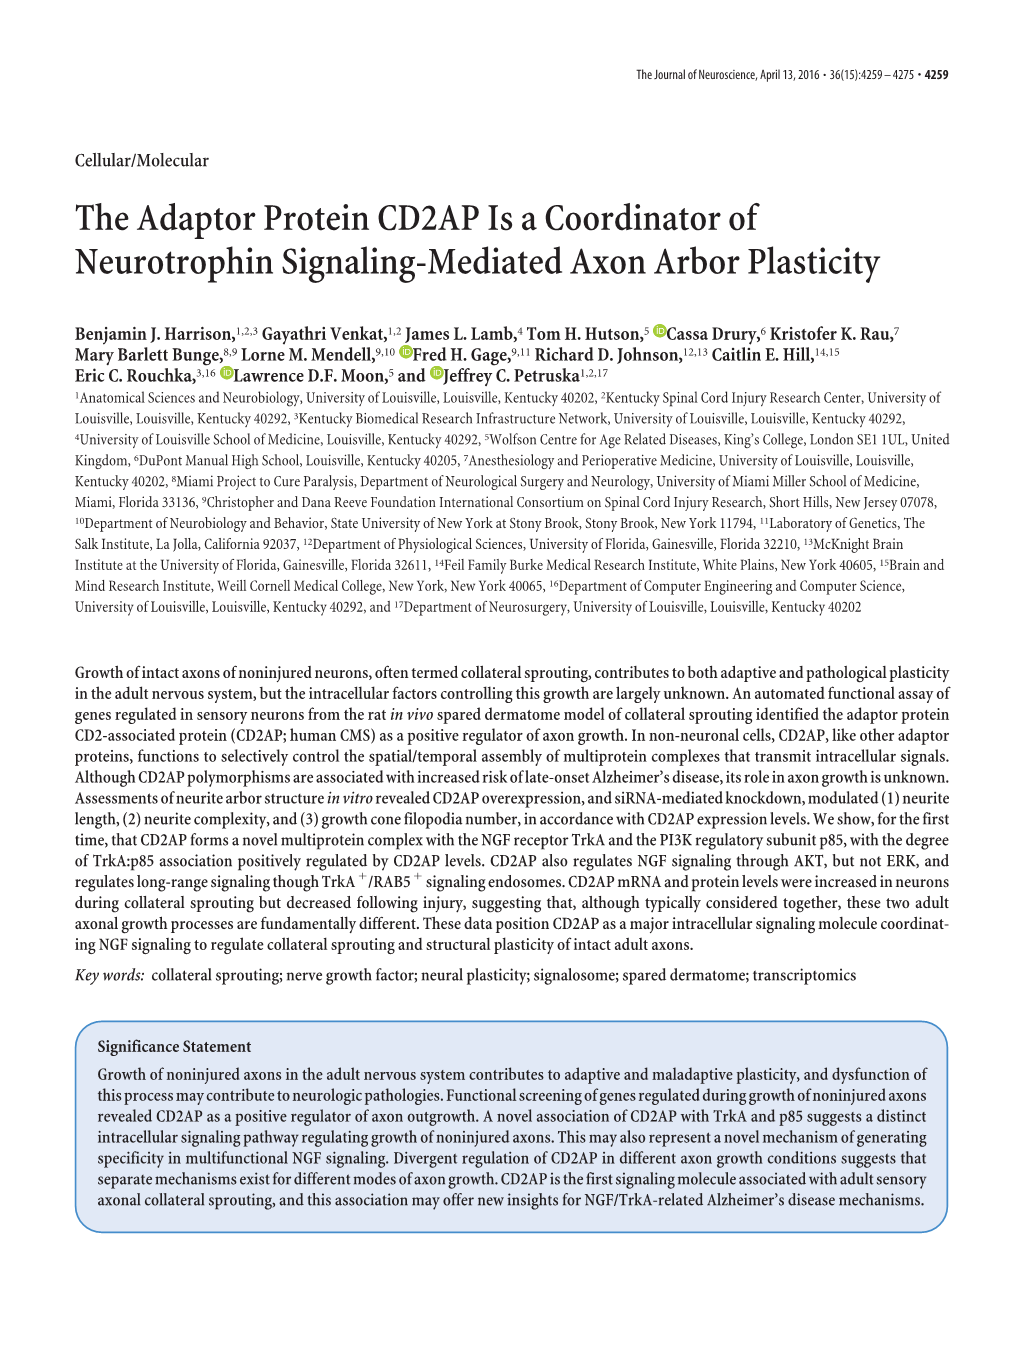 The Adaptor Protein CD2AP Is a Coordinator of Neurotrophin Signaling-Mediated Axon Arbor Plasticity